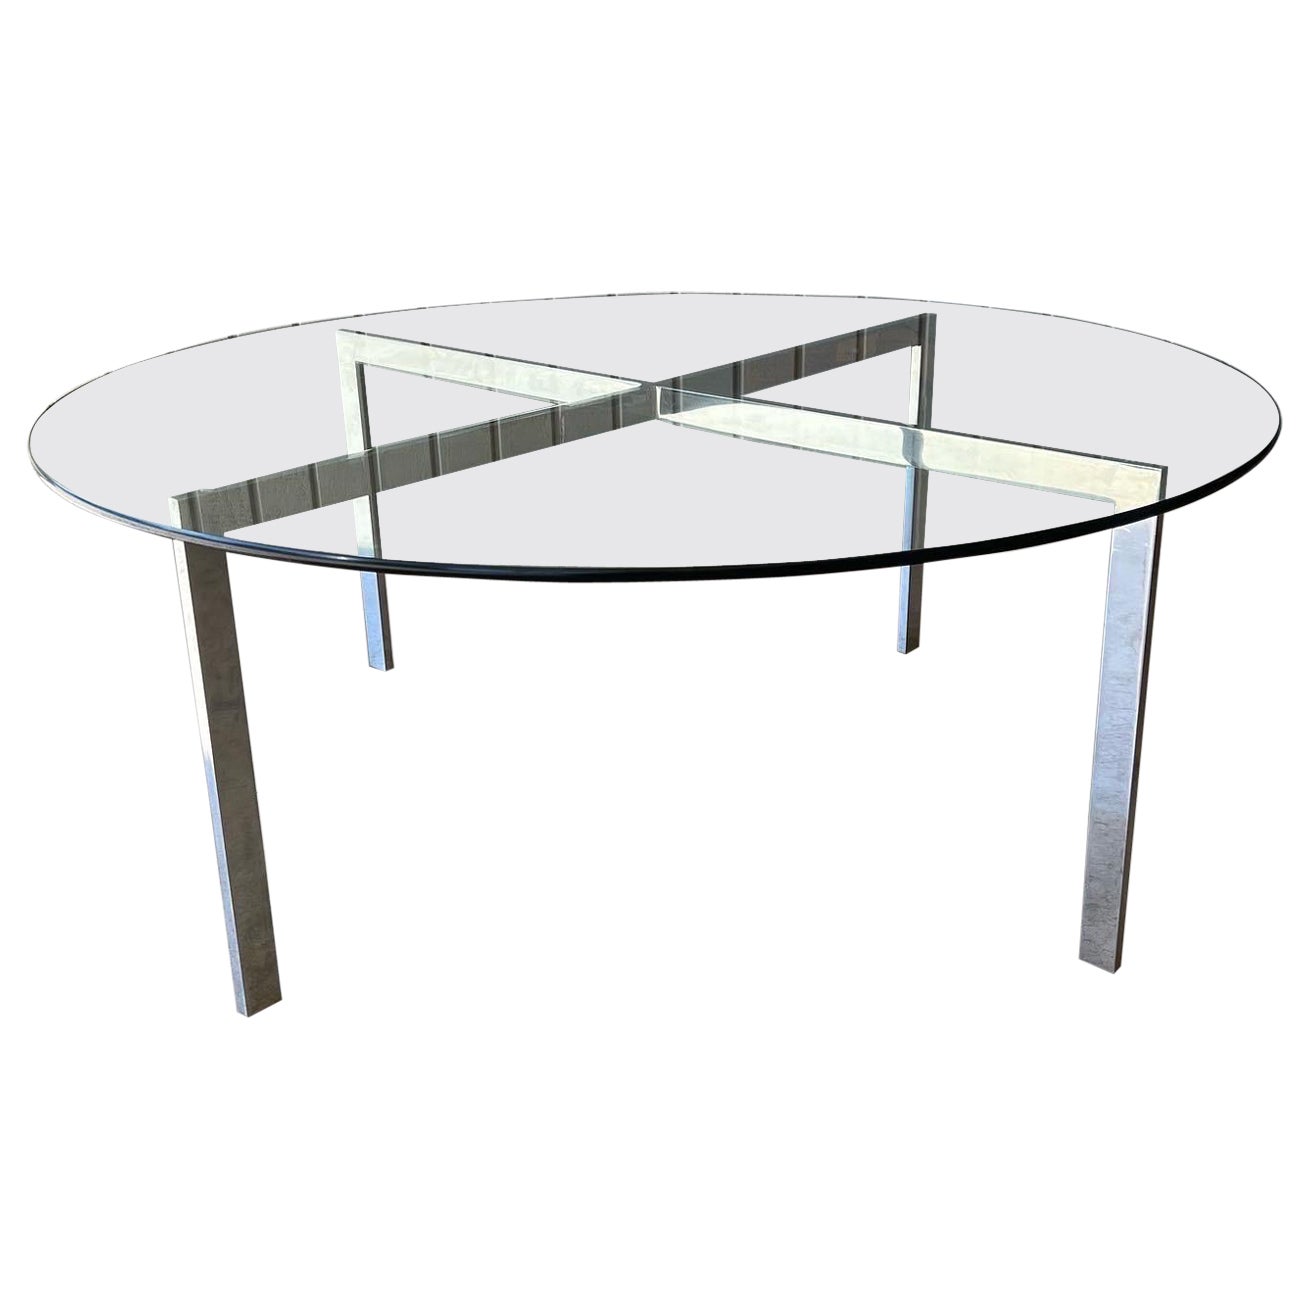 Barcelona Table with Stainless Steel Frame - 252